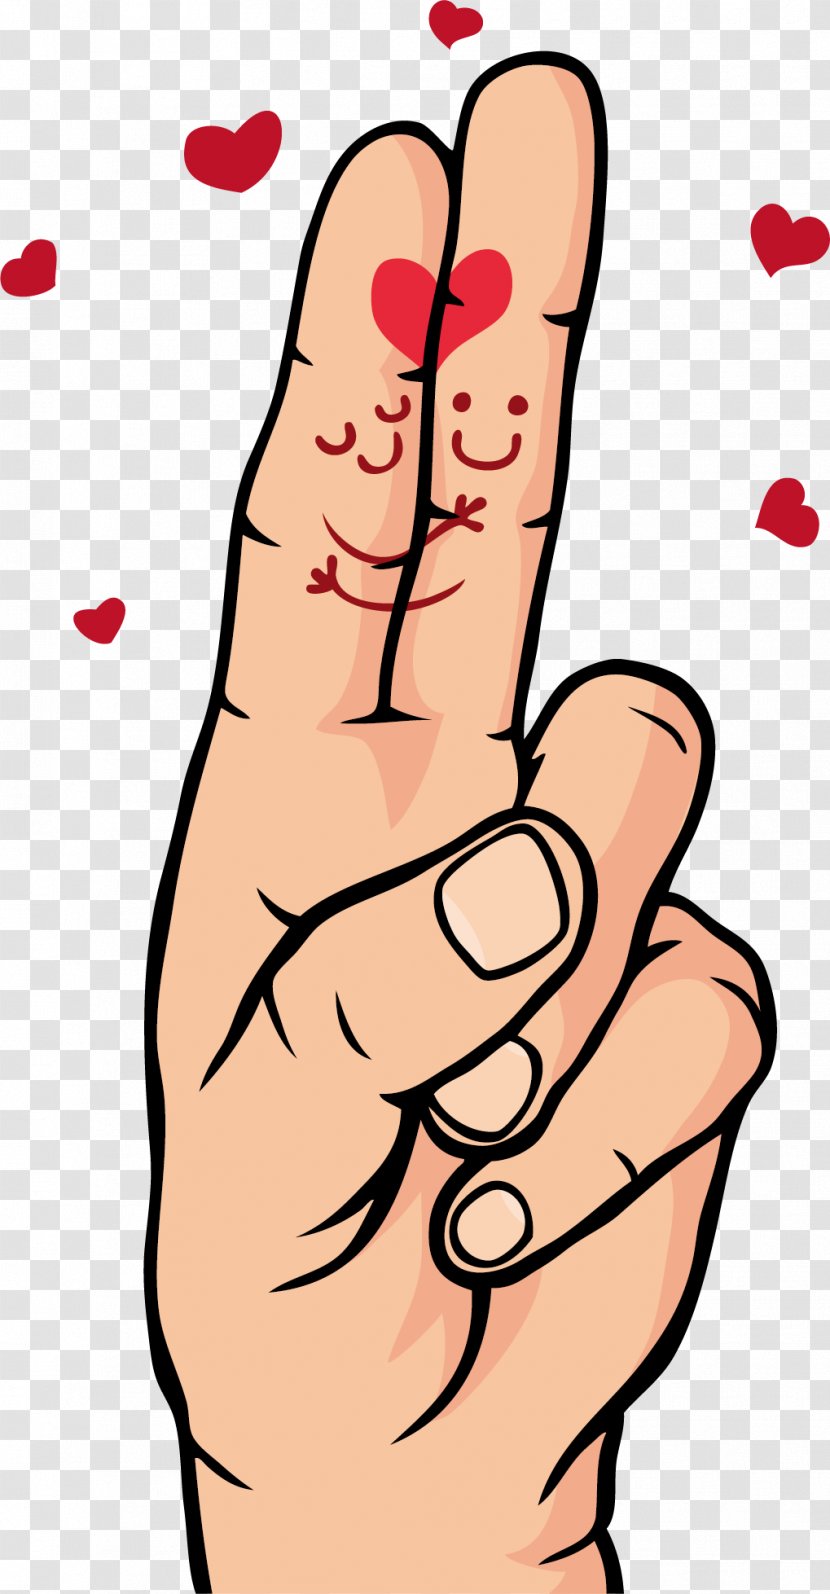 Love Thumb Heart Romance - Frame - Fingers On The Transparent PNG